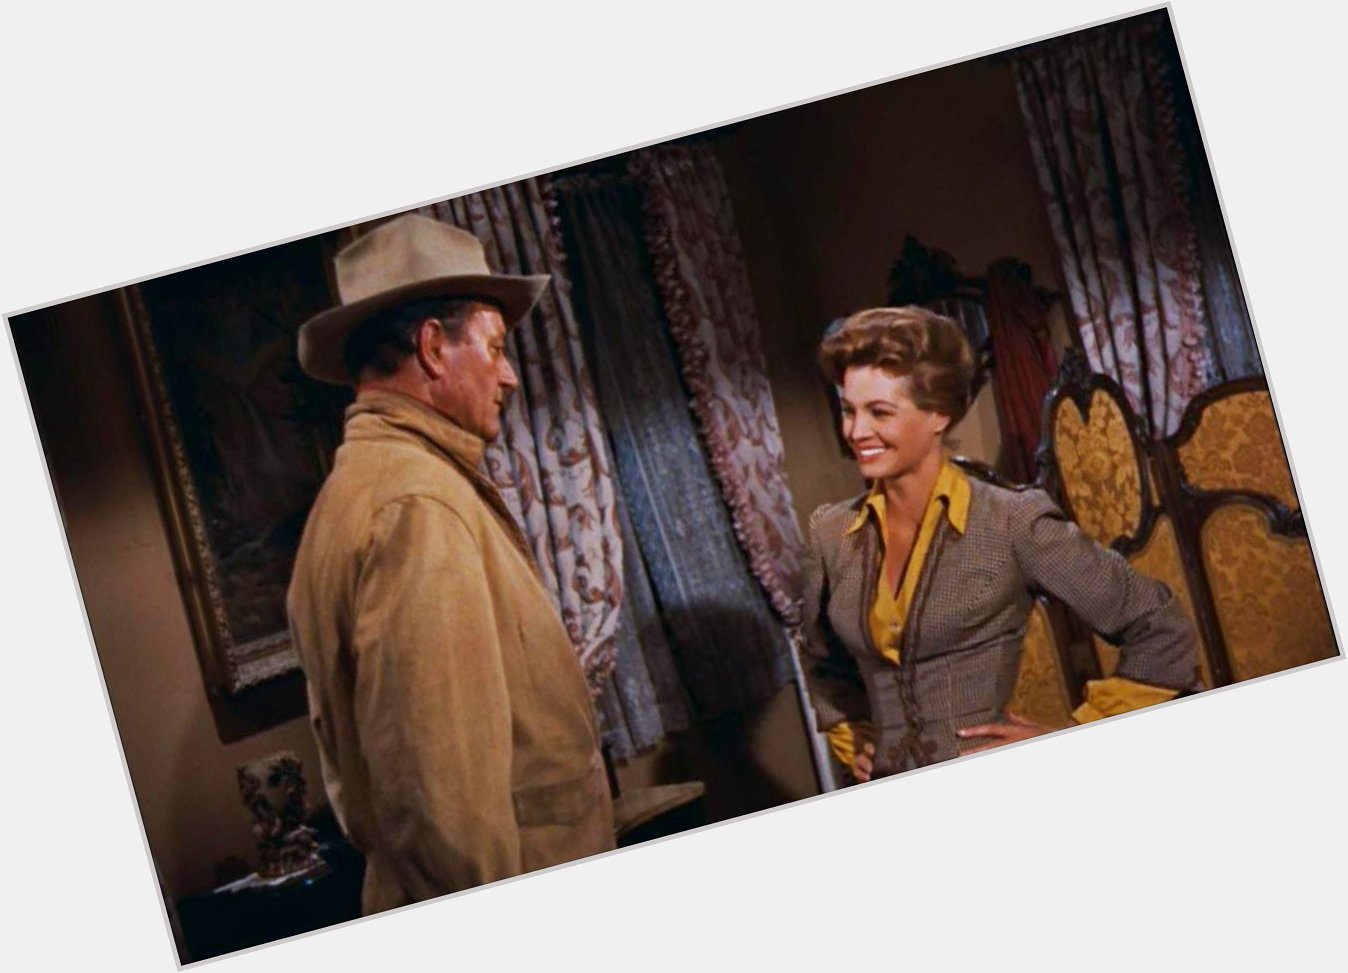 Happy Birthday Angie Dickinson! Here she is in my favorite role as \"Feathers\" in Rio Bravo with John Wayne. 